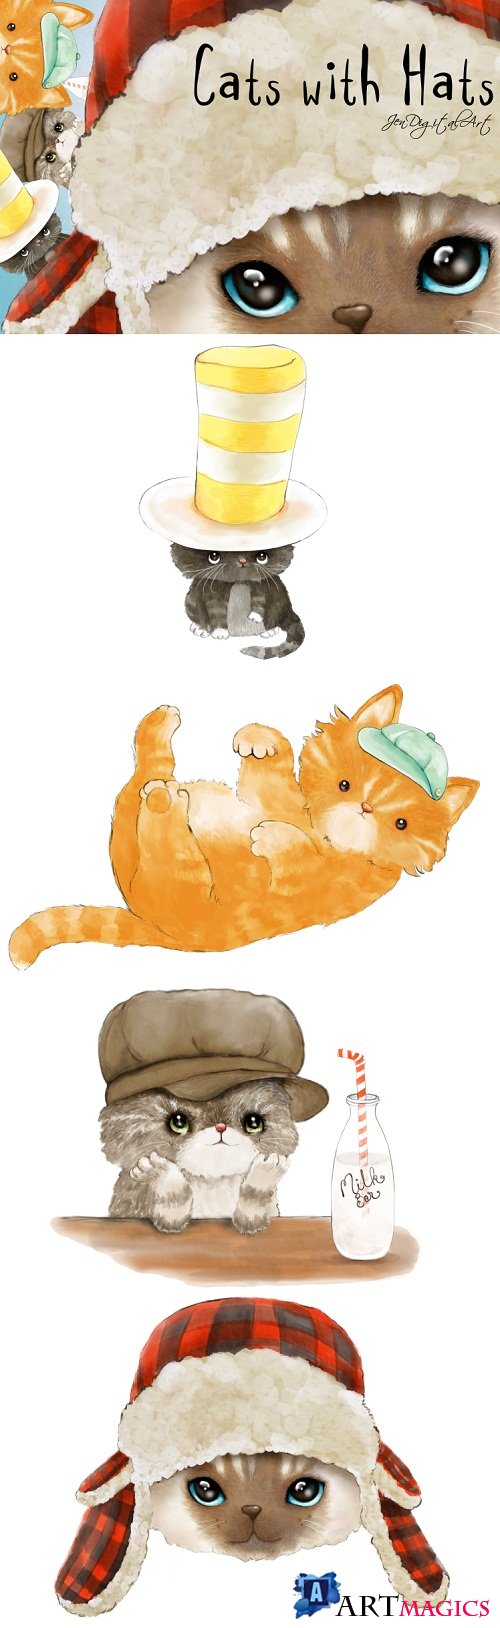 Cats with Hats Clip Art Illustrations - 184989